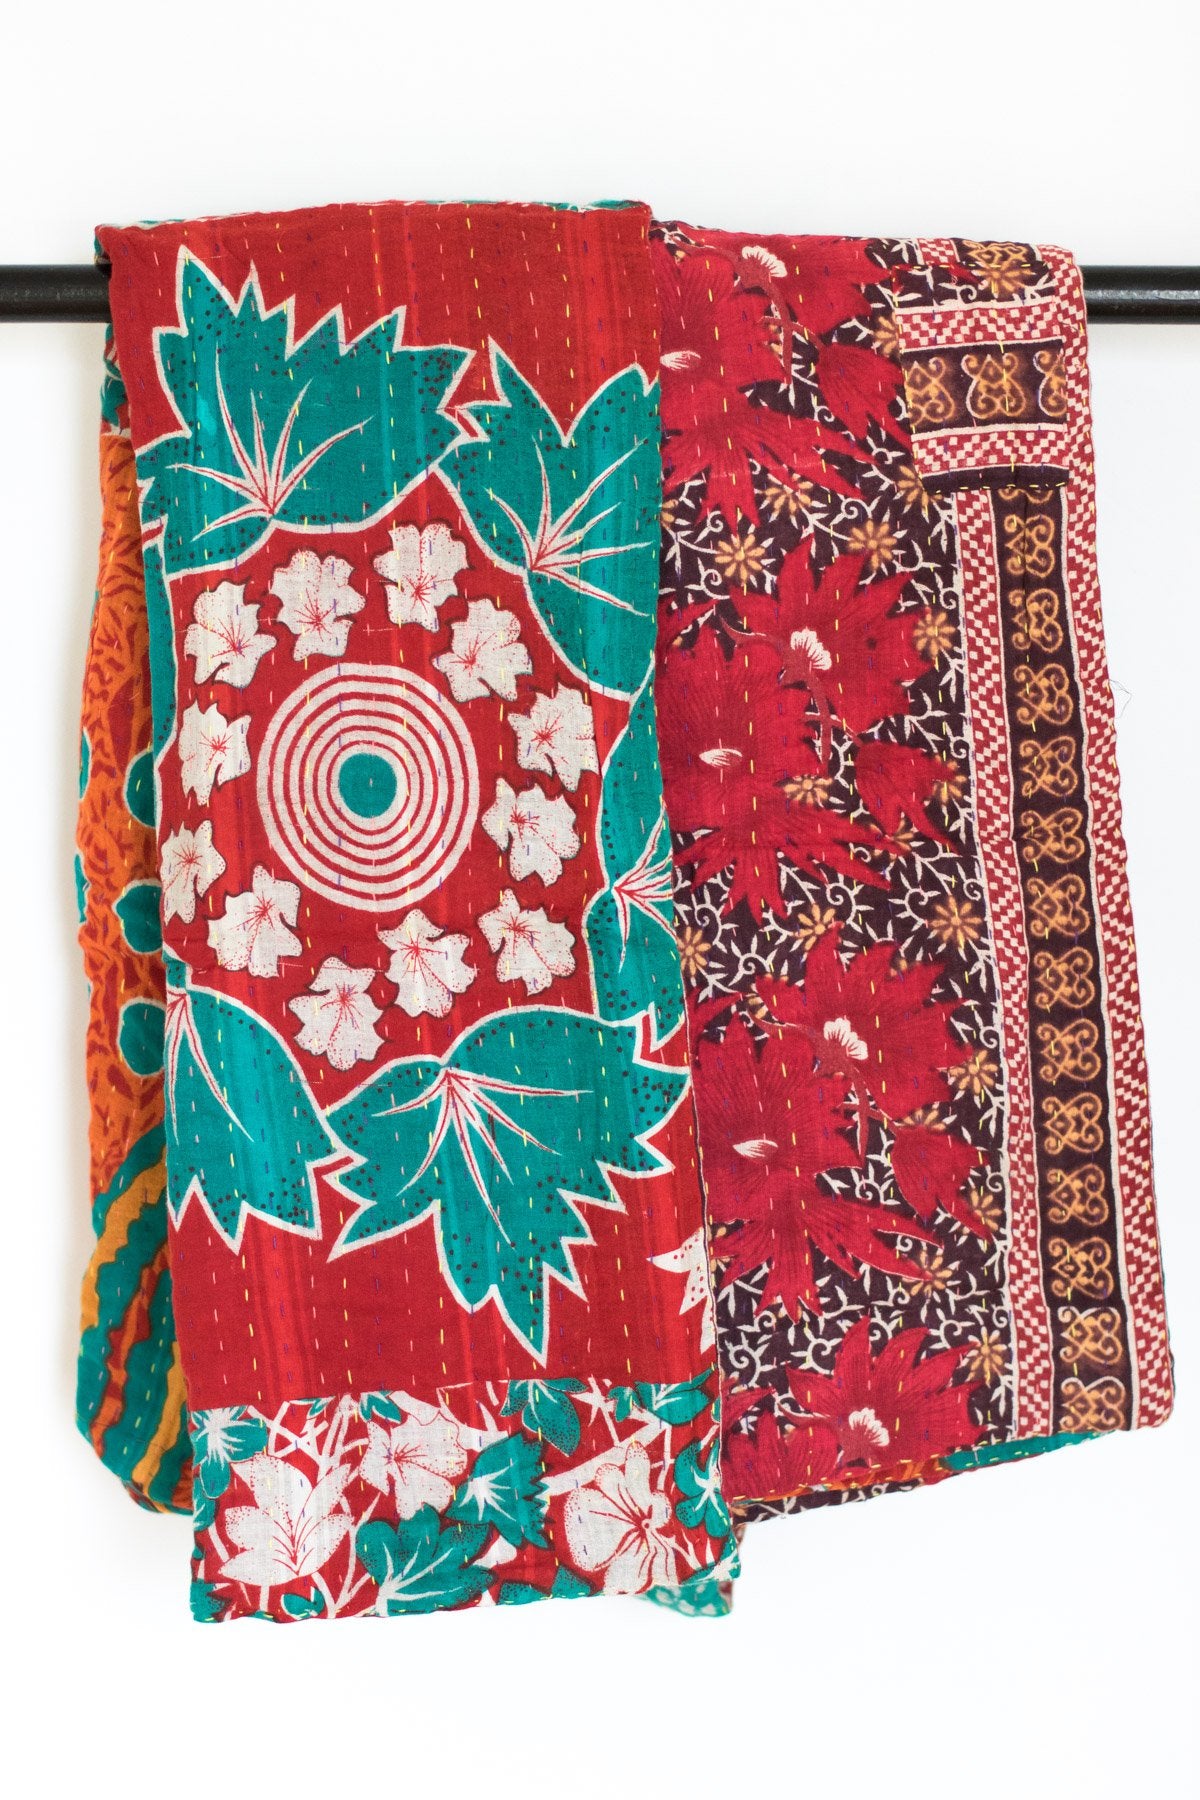 Fair Trade Kantha Quilts, Bedding & Meaningful Gifts